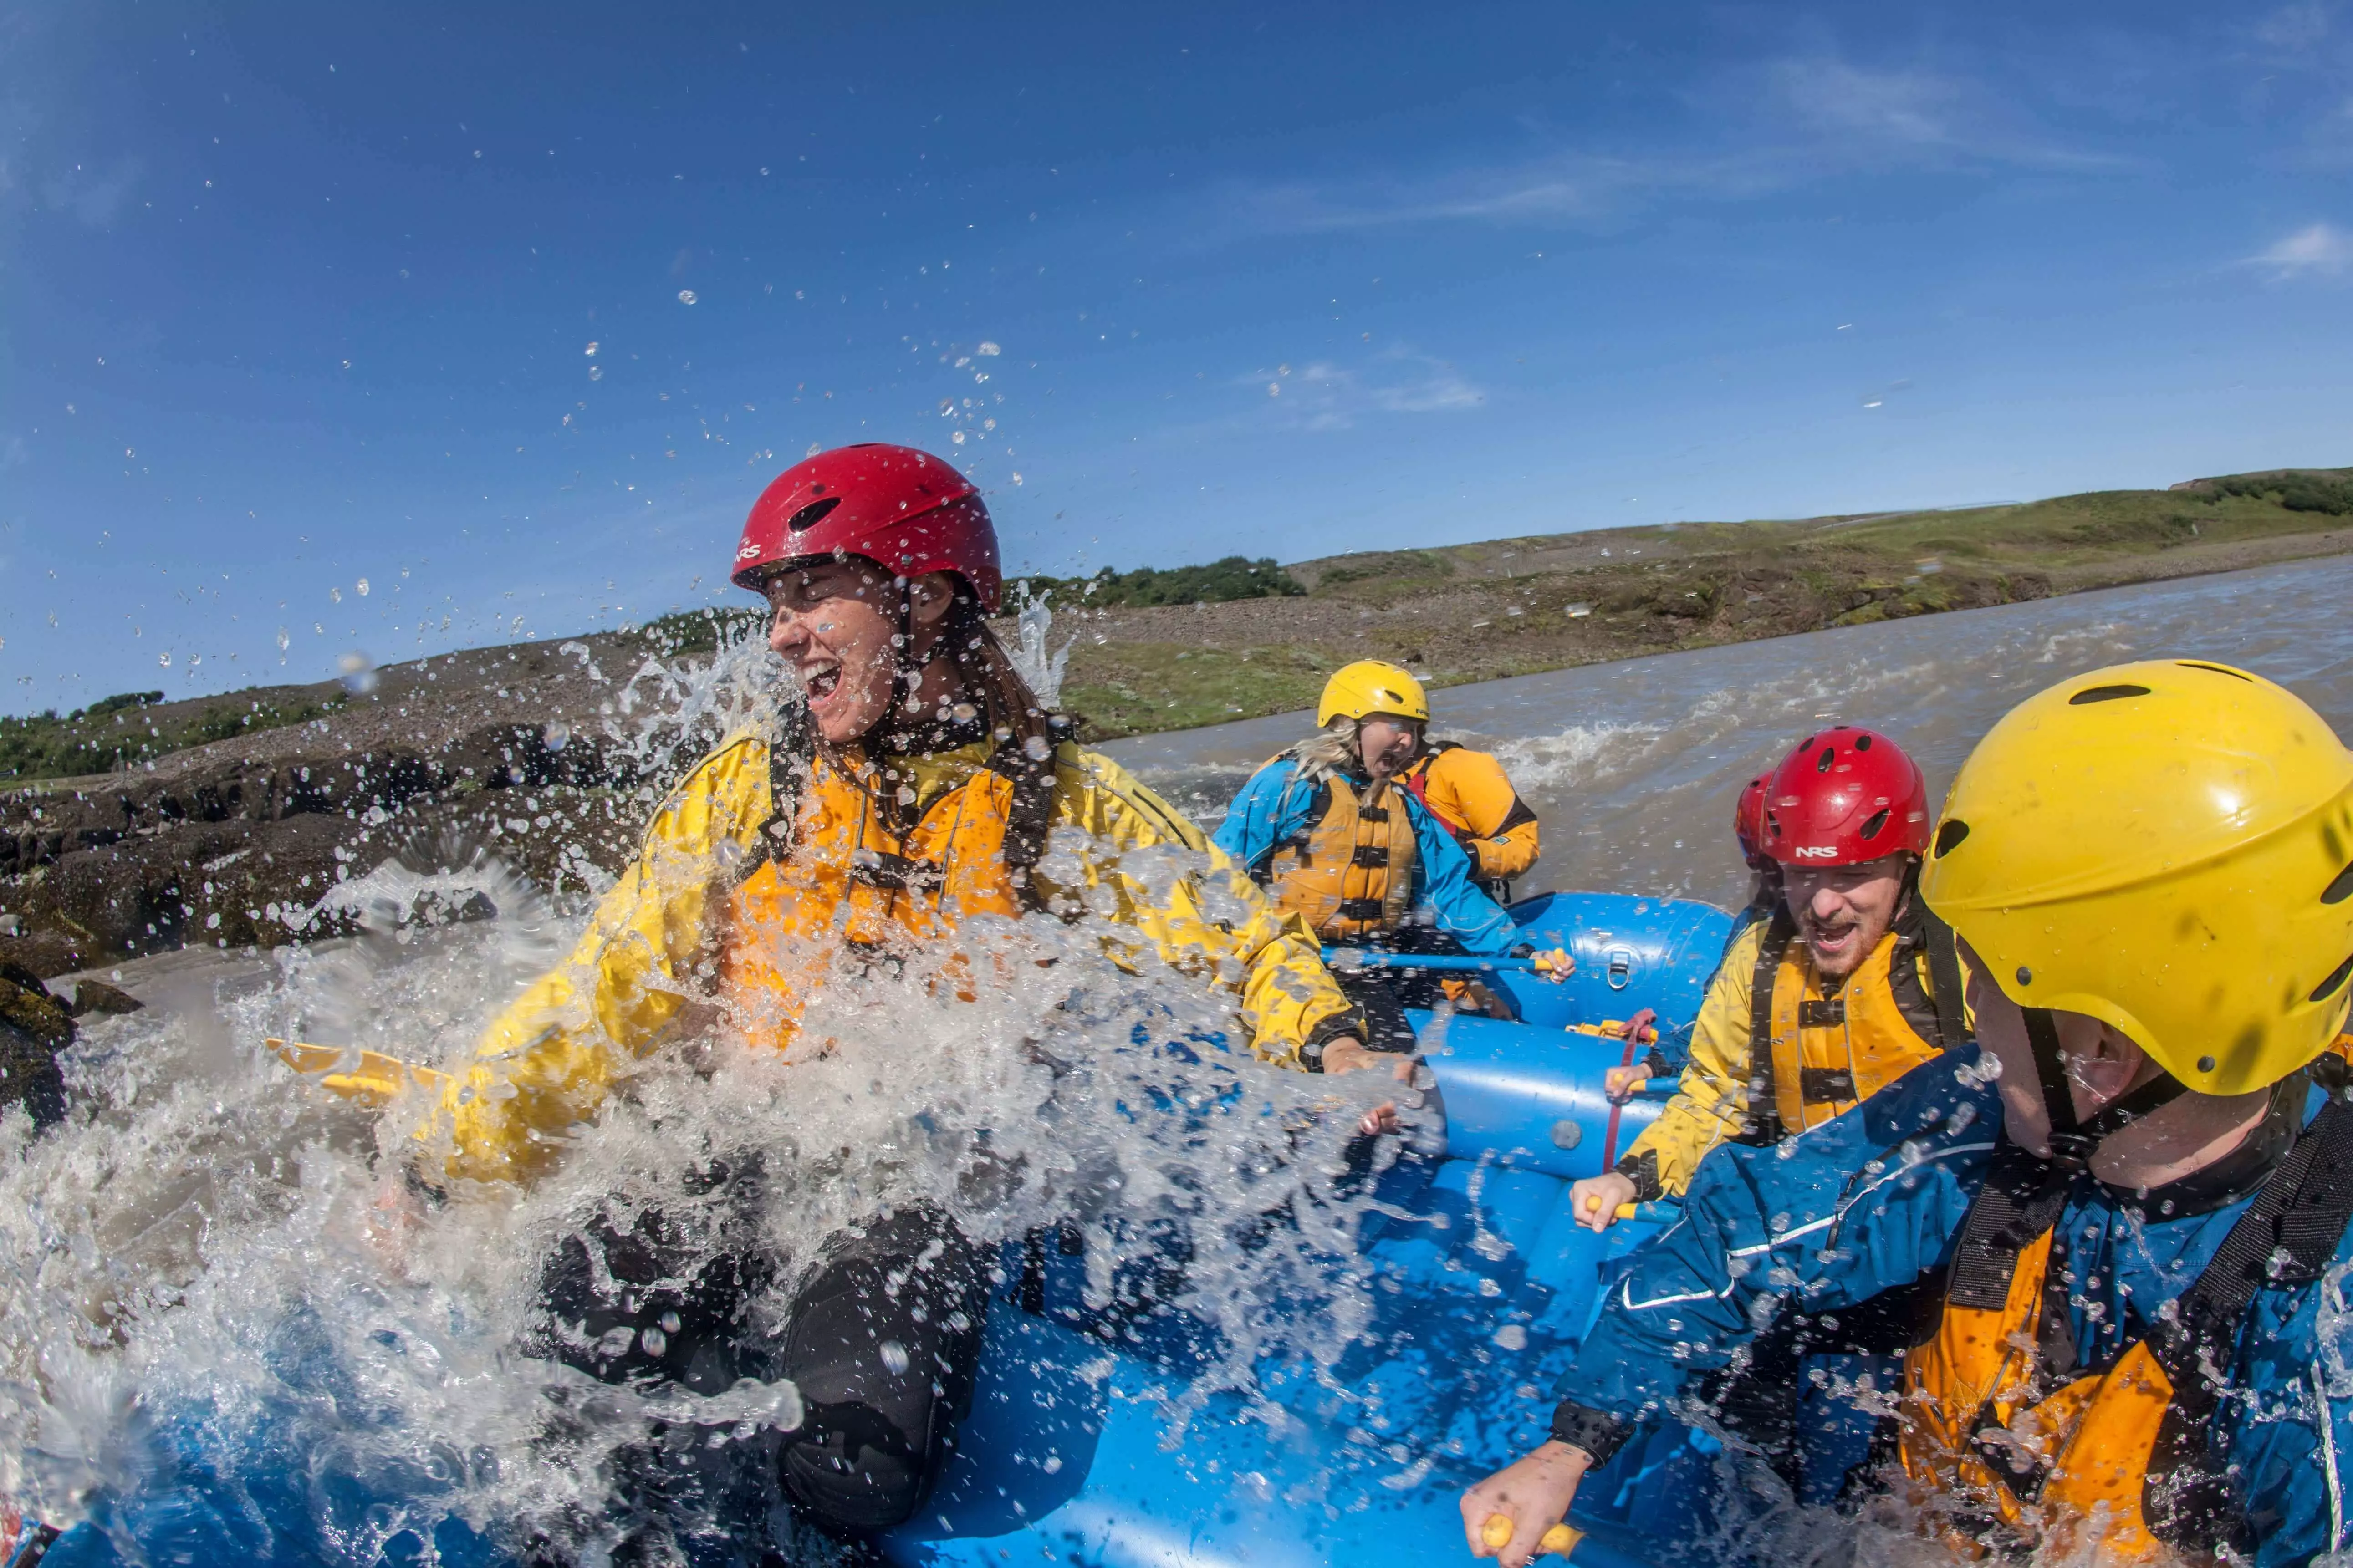 Rafting in Gullfoss Canyon, Iceland